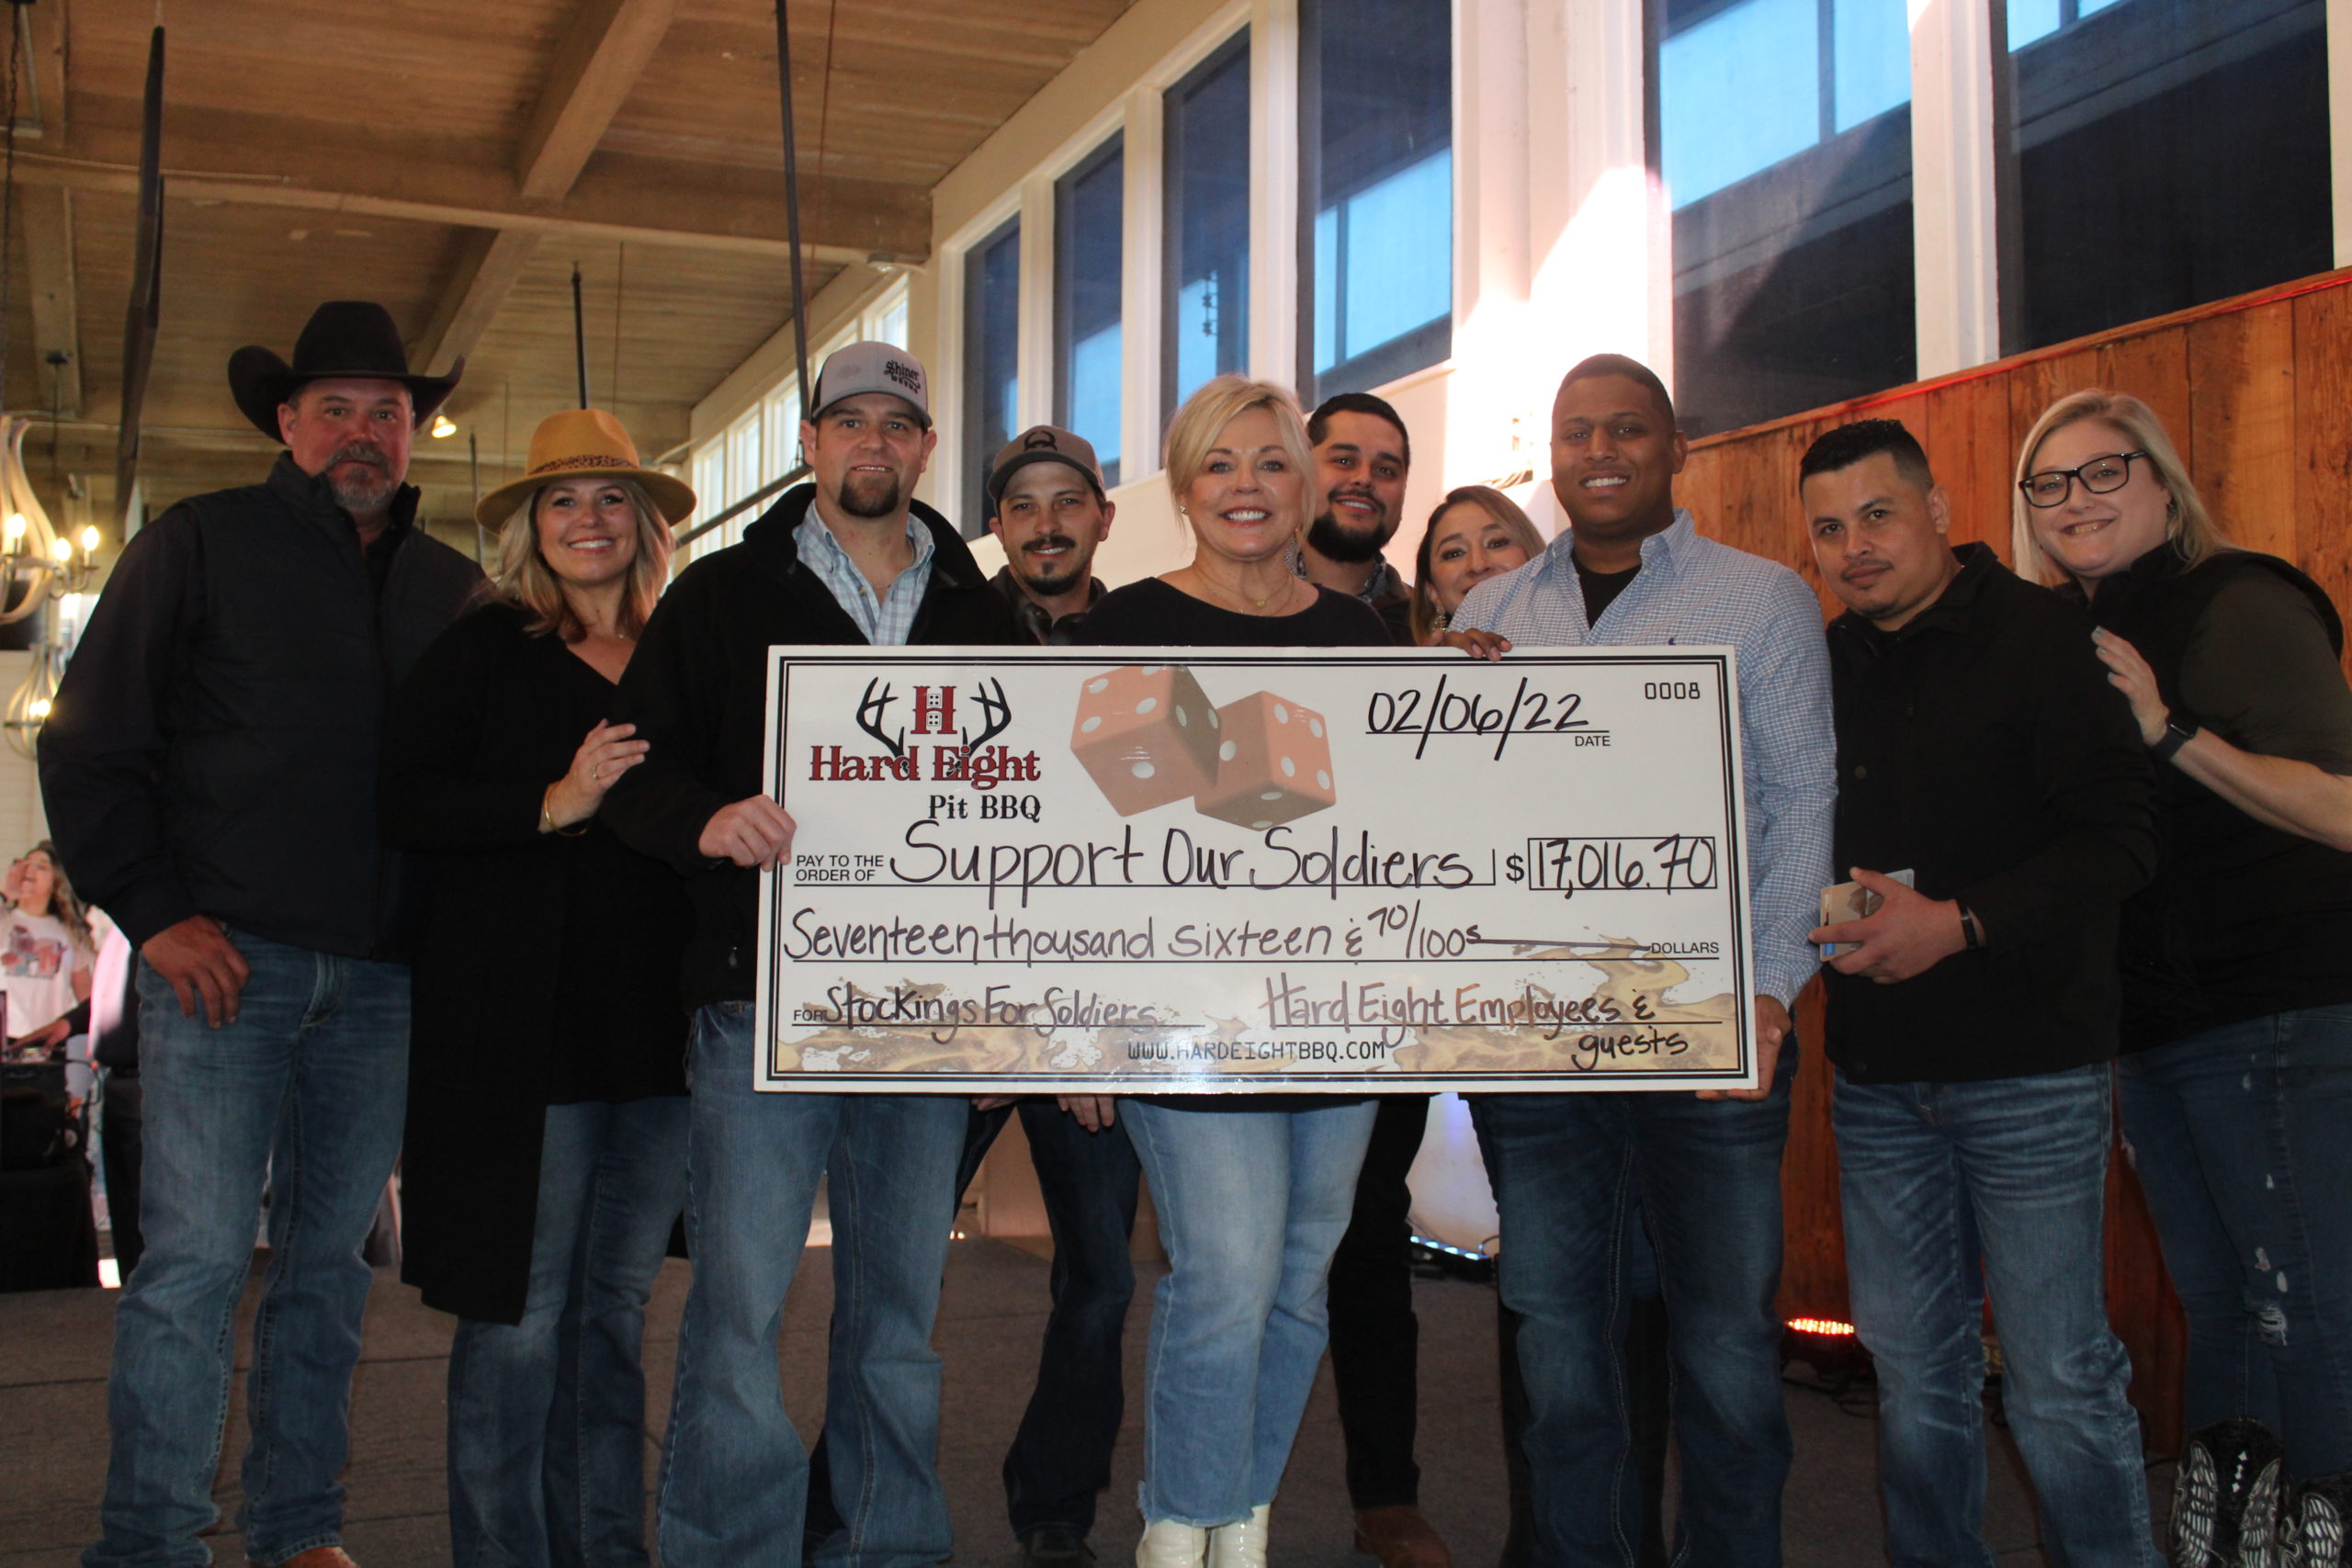 Hard Eight BBQ Guests and Employees Raise Over $17,000 For Support Our Soldiers!